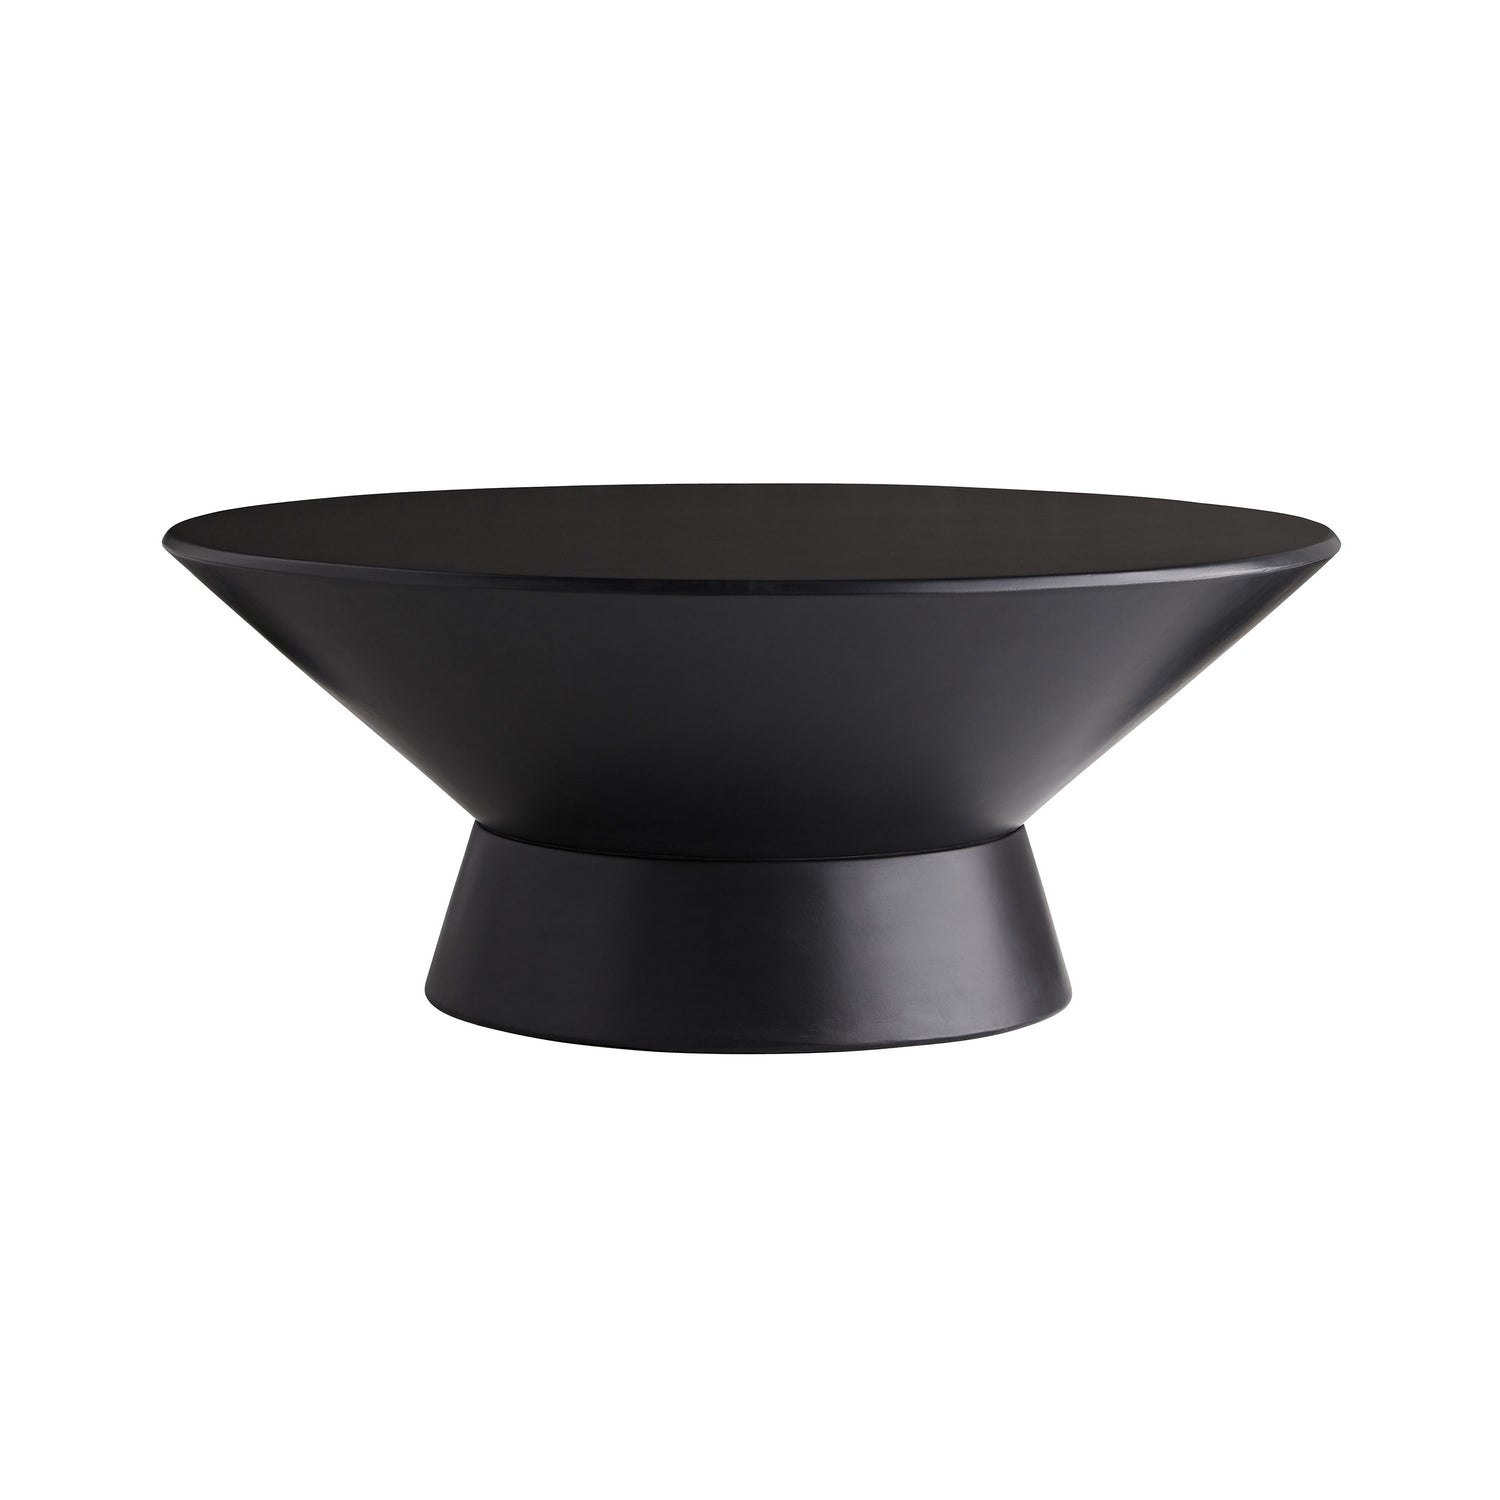 Cocktail Table from the Beckham collection in Matte Black finish